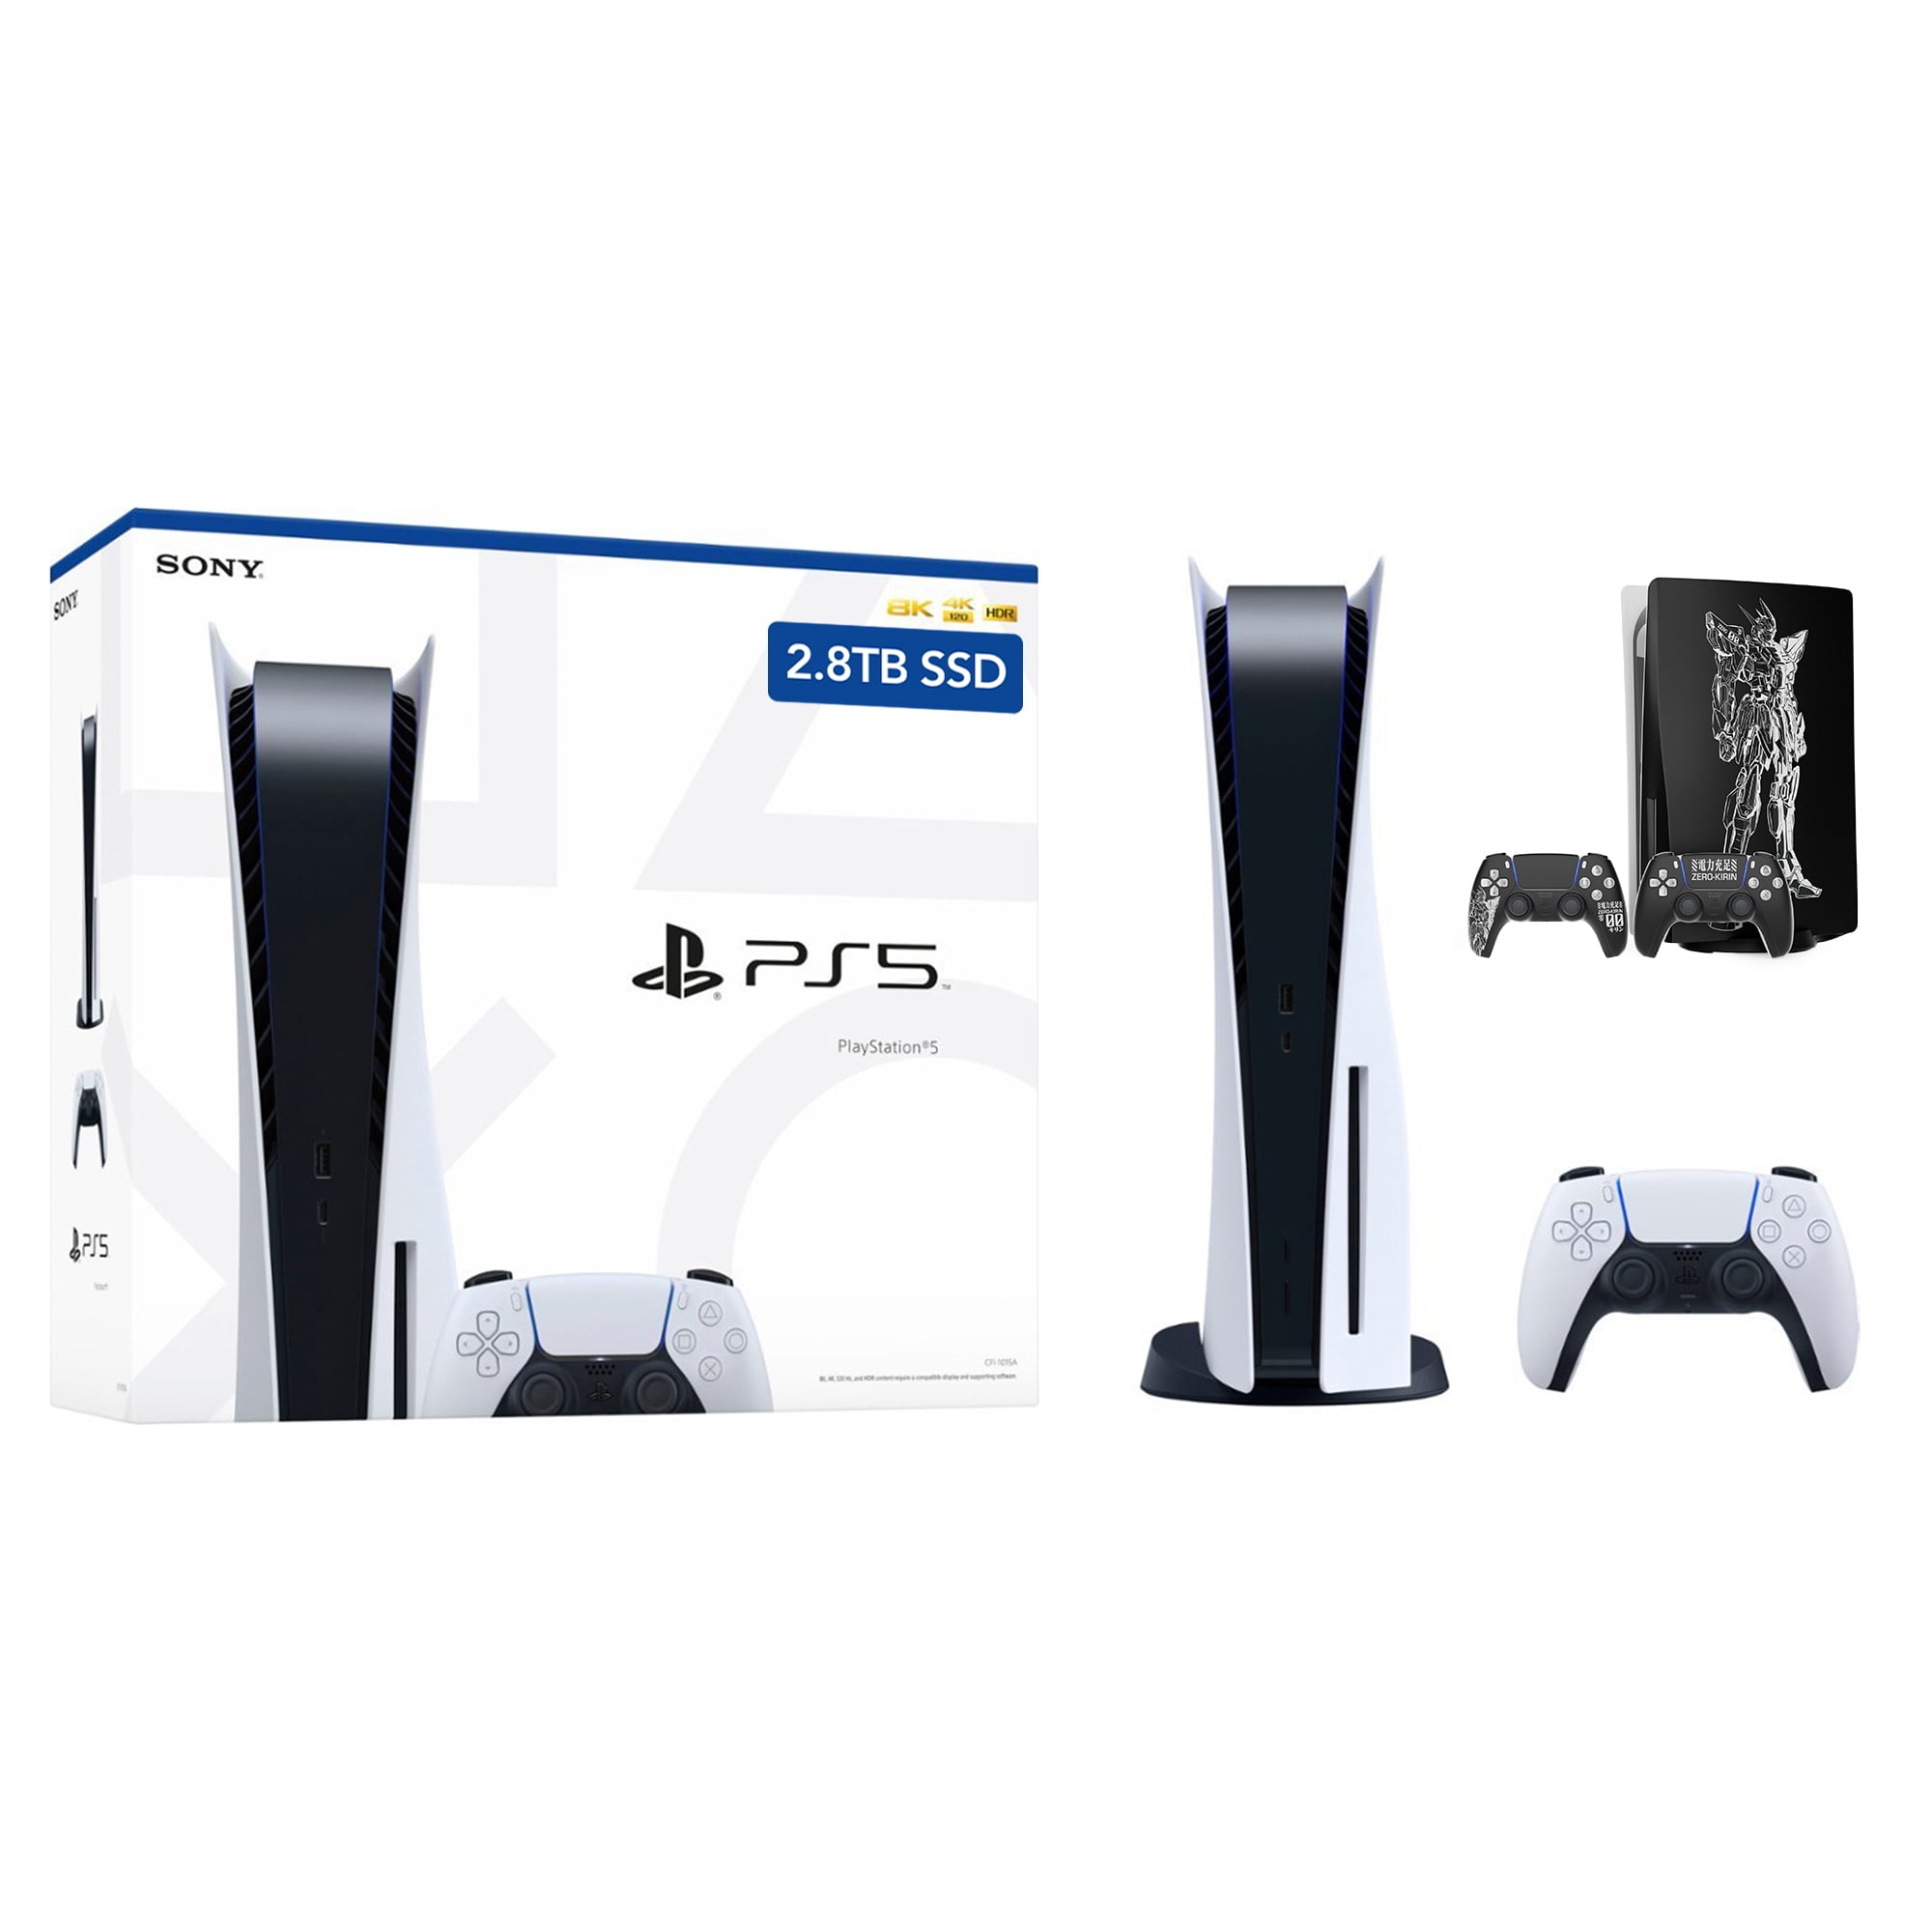 PlayStation 5 Disc 1.8TB Upgraded SSD PS5 Gaming Console, Mytrix Full Body  Skin Sticker, Samurai - PS5 Disc Version JP Region Free